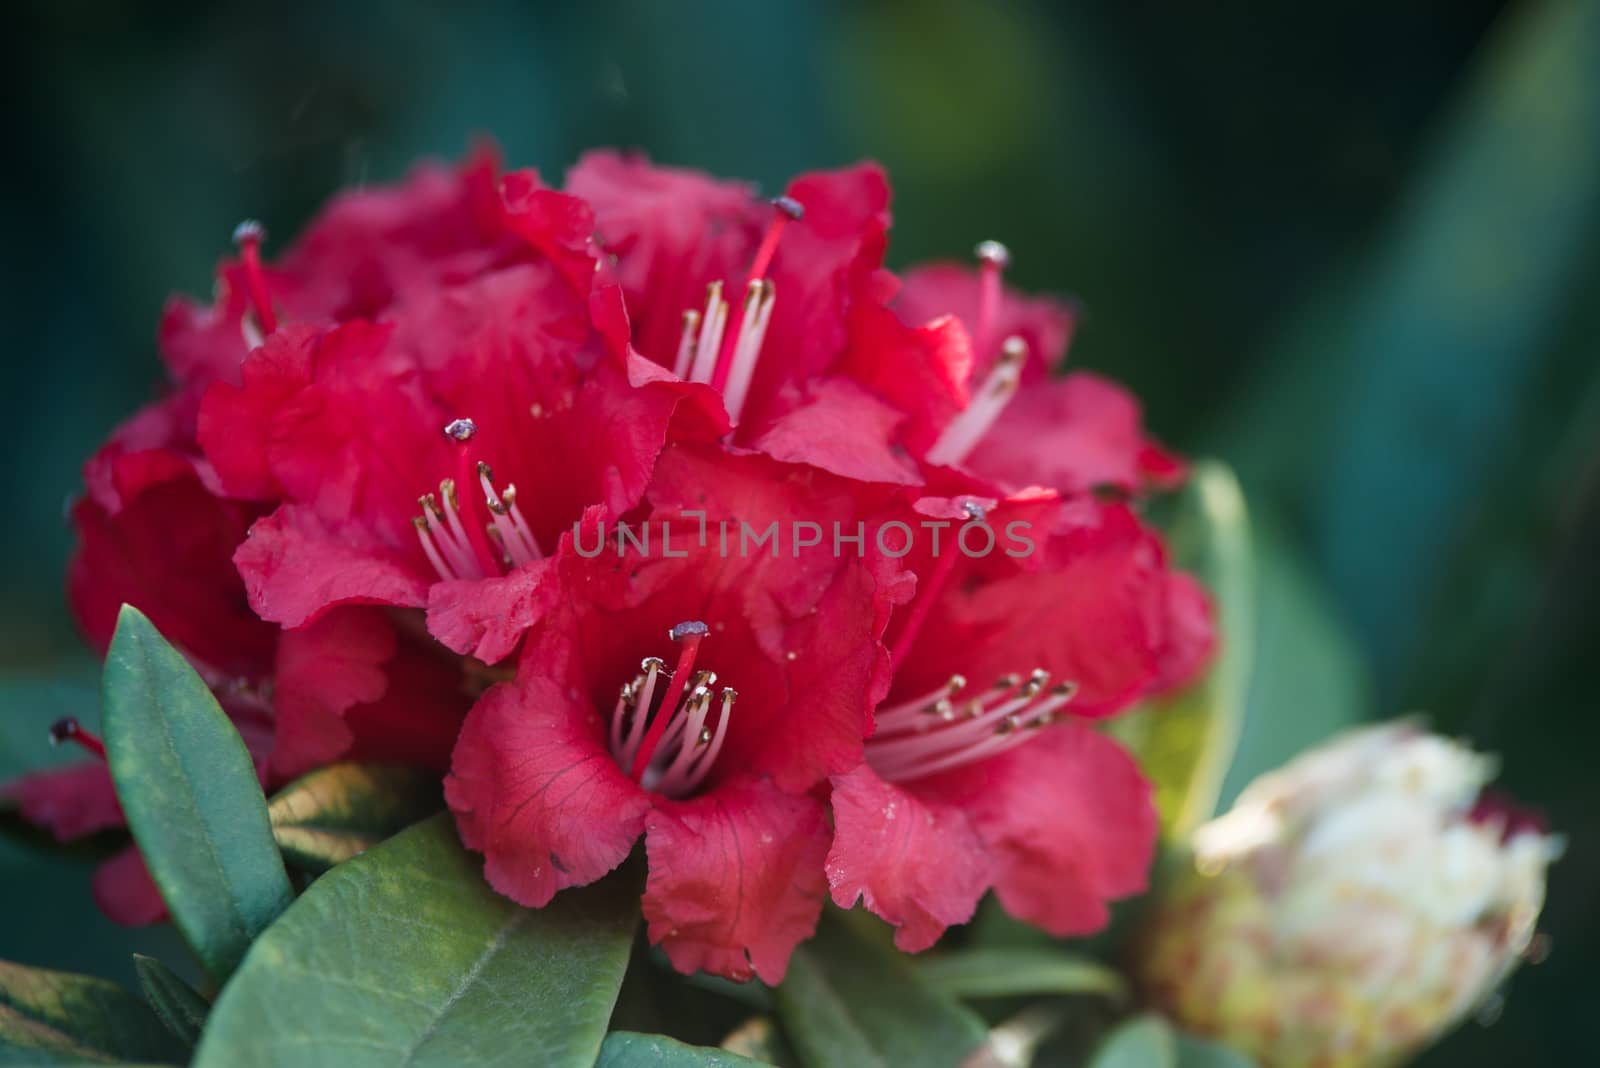 Rhododendron arboreum (Azalea) in doi inthanon national park, Th by jakgree